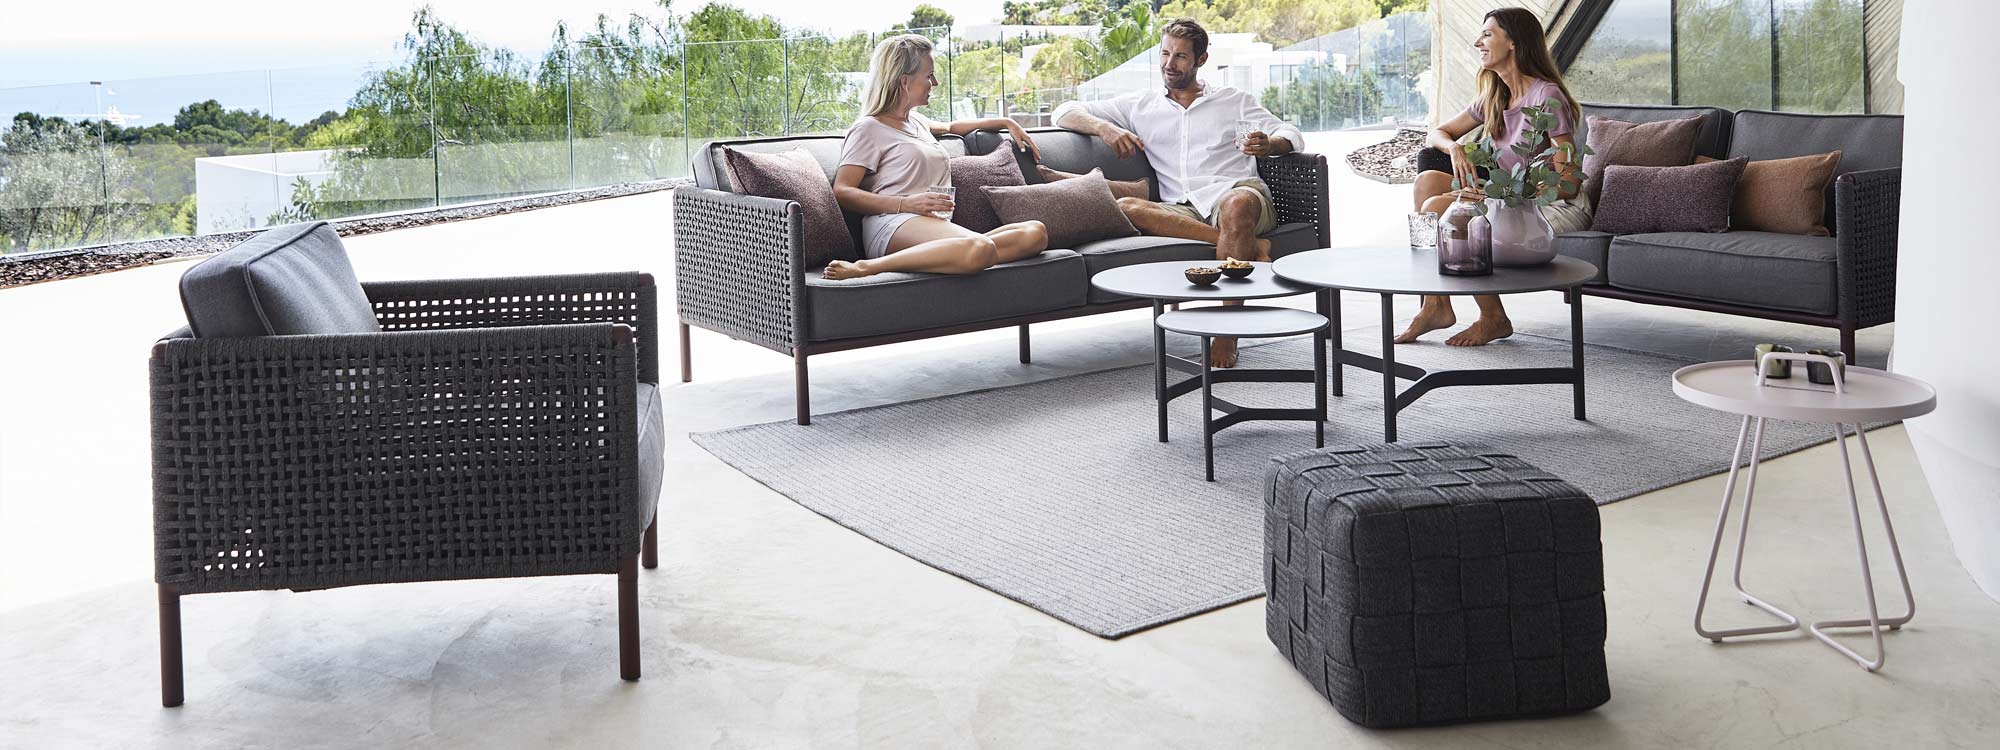 Image of 2 women and a man relaxing on dark grey Encore garden sofa with Cane-line Twist garden low tables in center, shown on minimalist terrace with trees and sea in the background